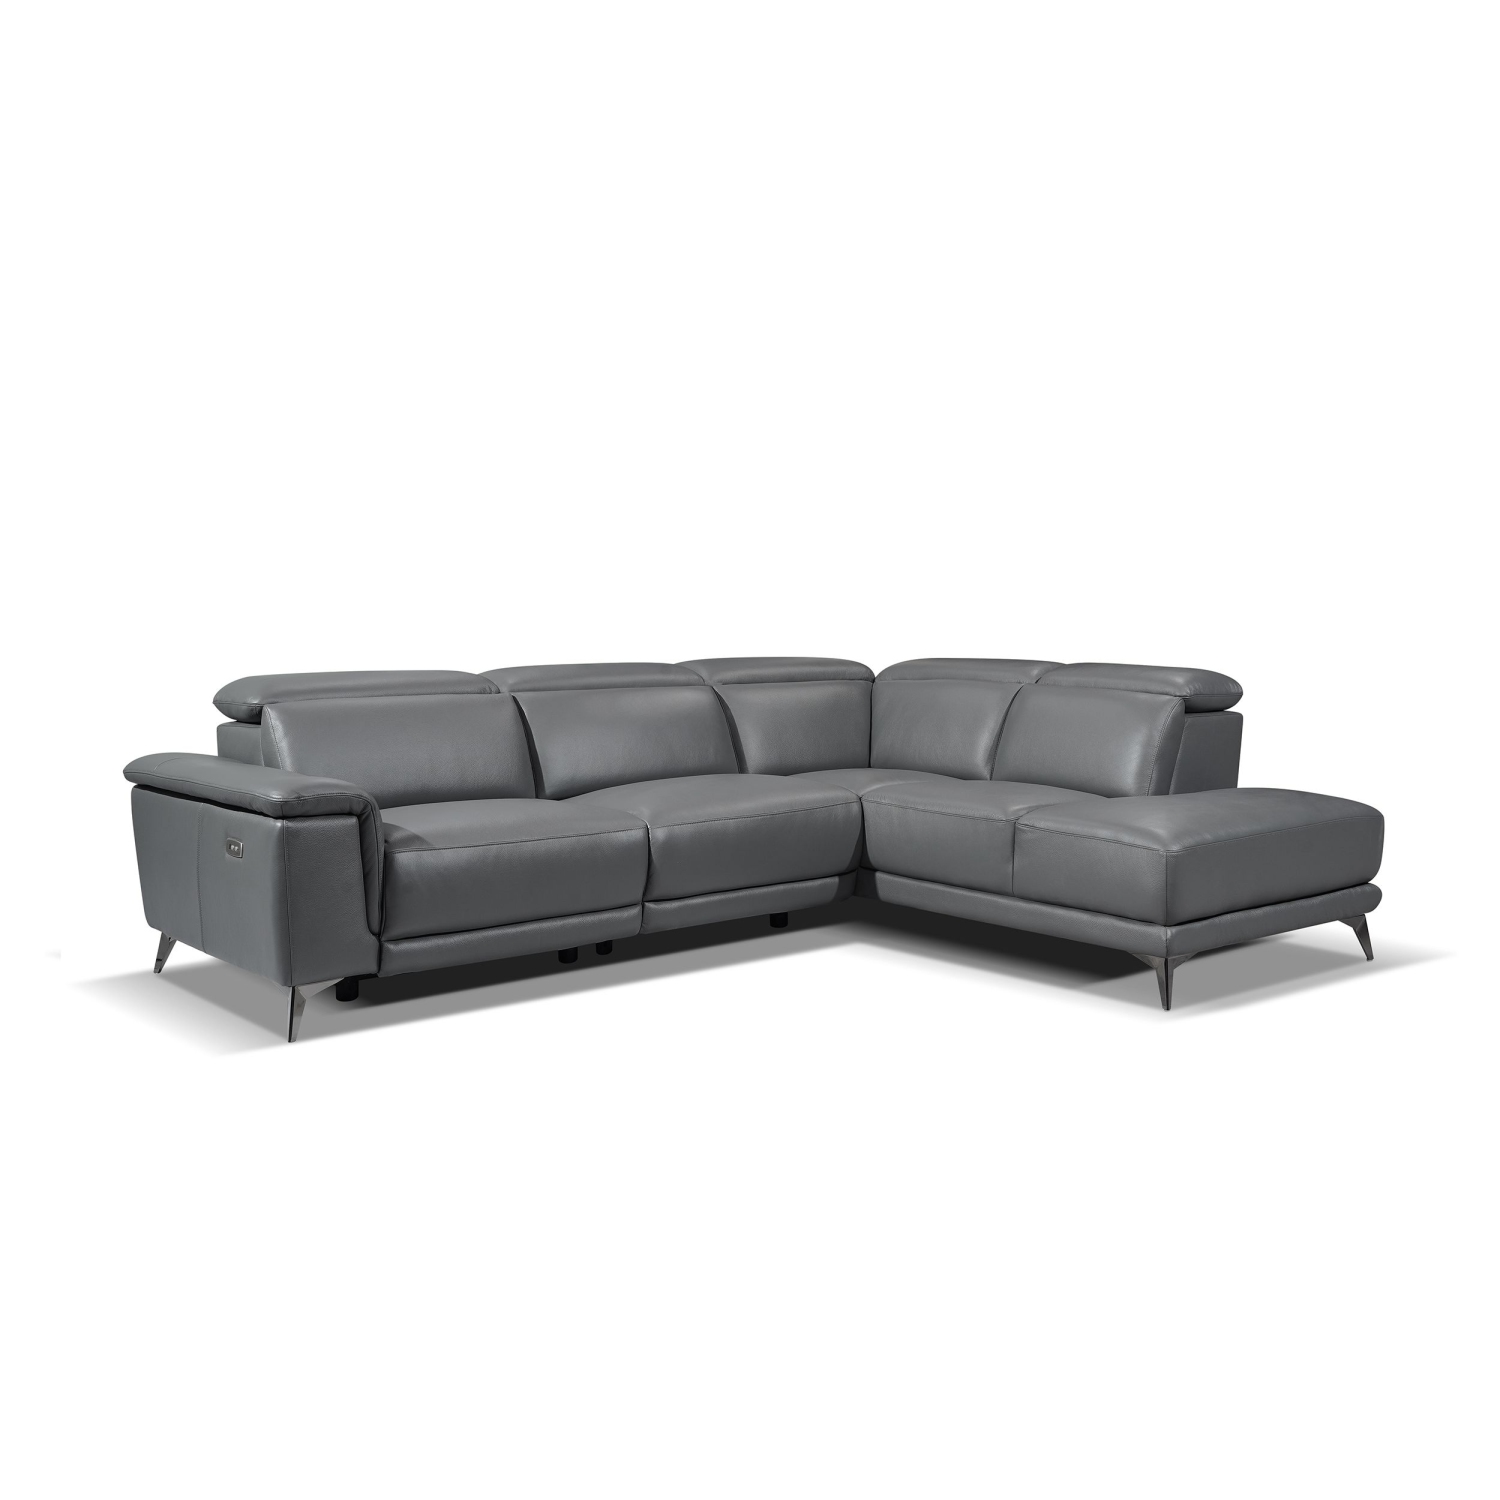 Pista Contemporary Grey Top Grain Leather Power Reclining Sectional